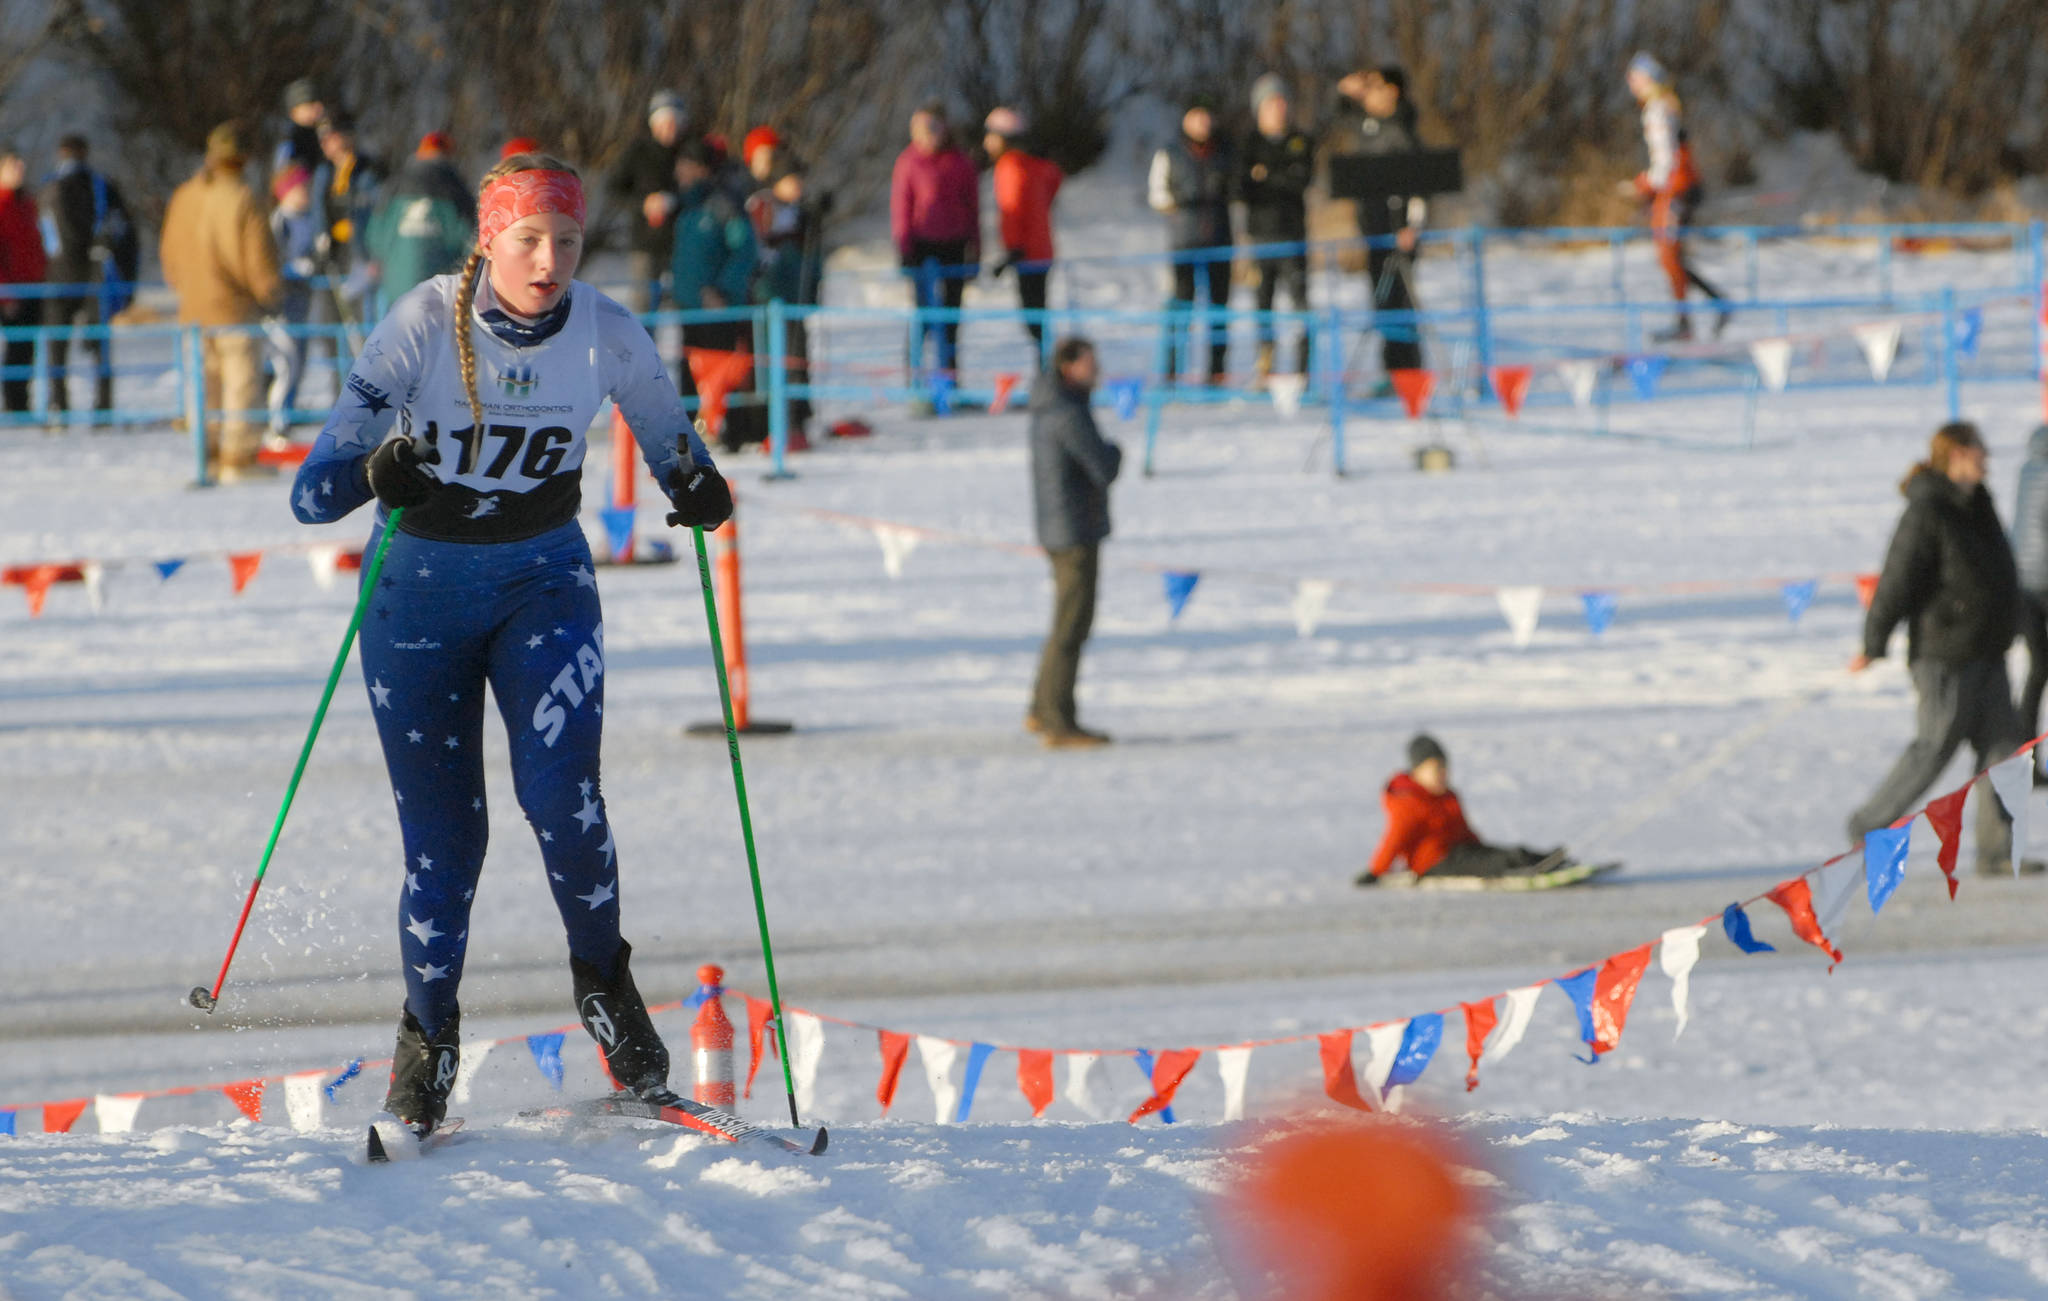 Soldotna’s Cameron Blackwell skis up a hill during the first day of the Lynx Loppet Nordic ski races on Friday, Dec. 8, 2017 at Kincaid Park. (Star photo by Matt Tunseth) Soldotna’s Cameron Blackwell skis up a hill during the first day of the Lynx Loppet Nordic ski races on Friday, Dec. 8, 2017 at Kincaid Park in Anchorage. (Chugiak-Eagle River Star photo by Matt Tunseth)